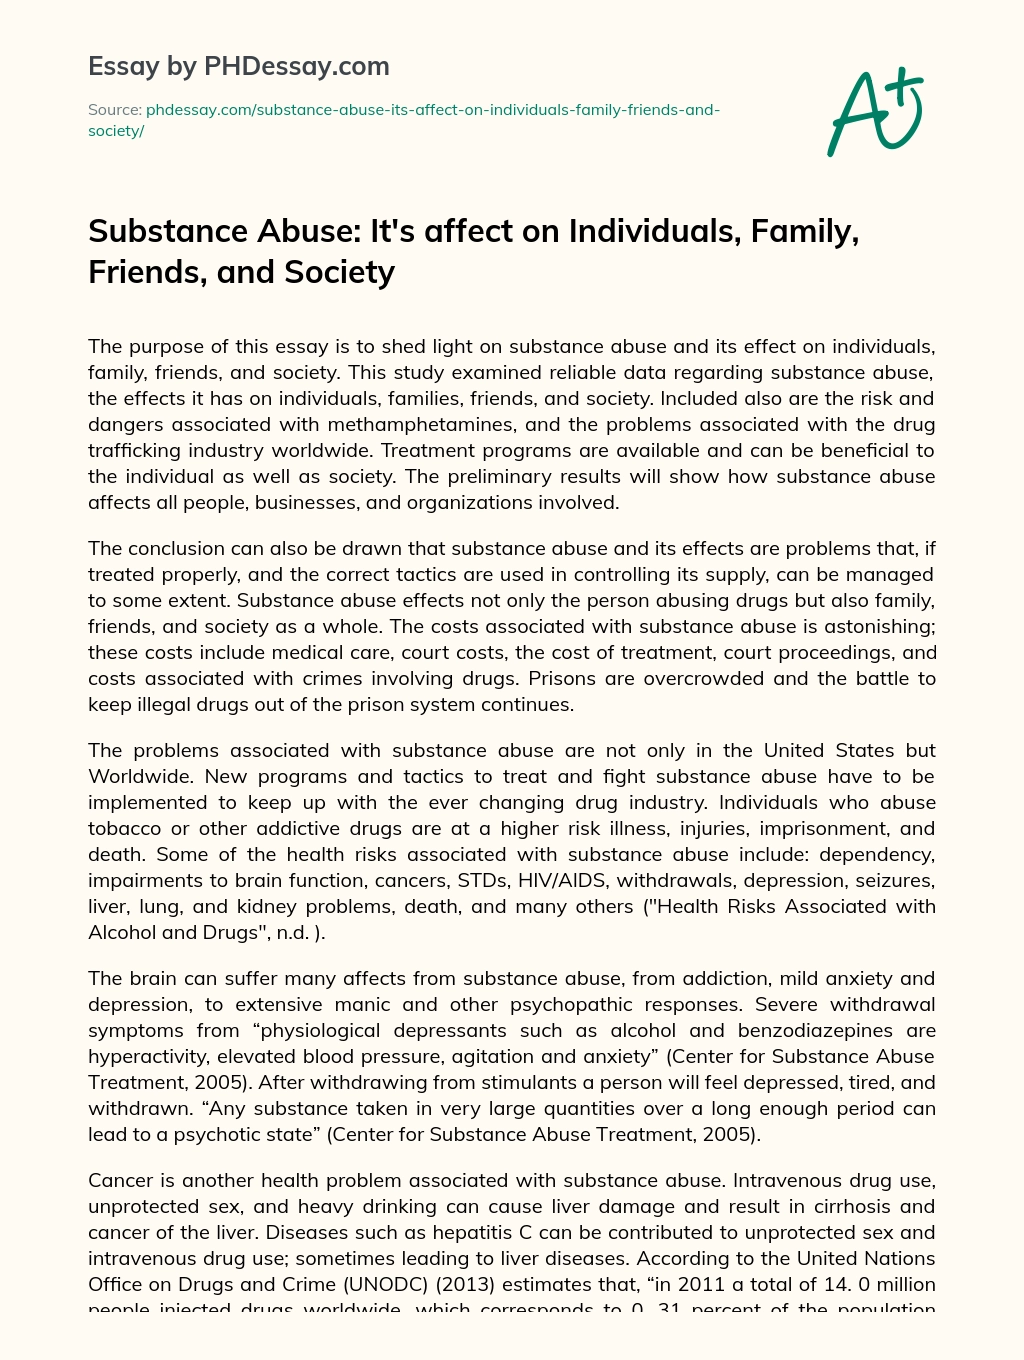 Substance Abuse: It’s affect on Individuals, Family, Friends, and Society essay